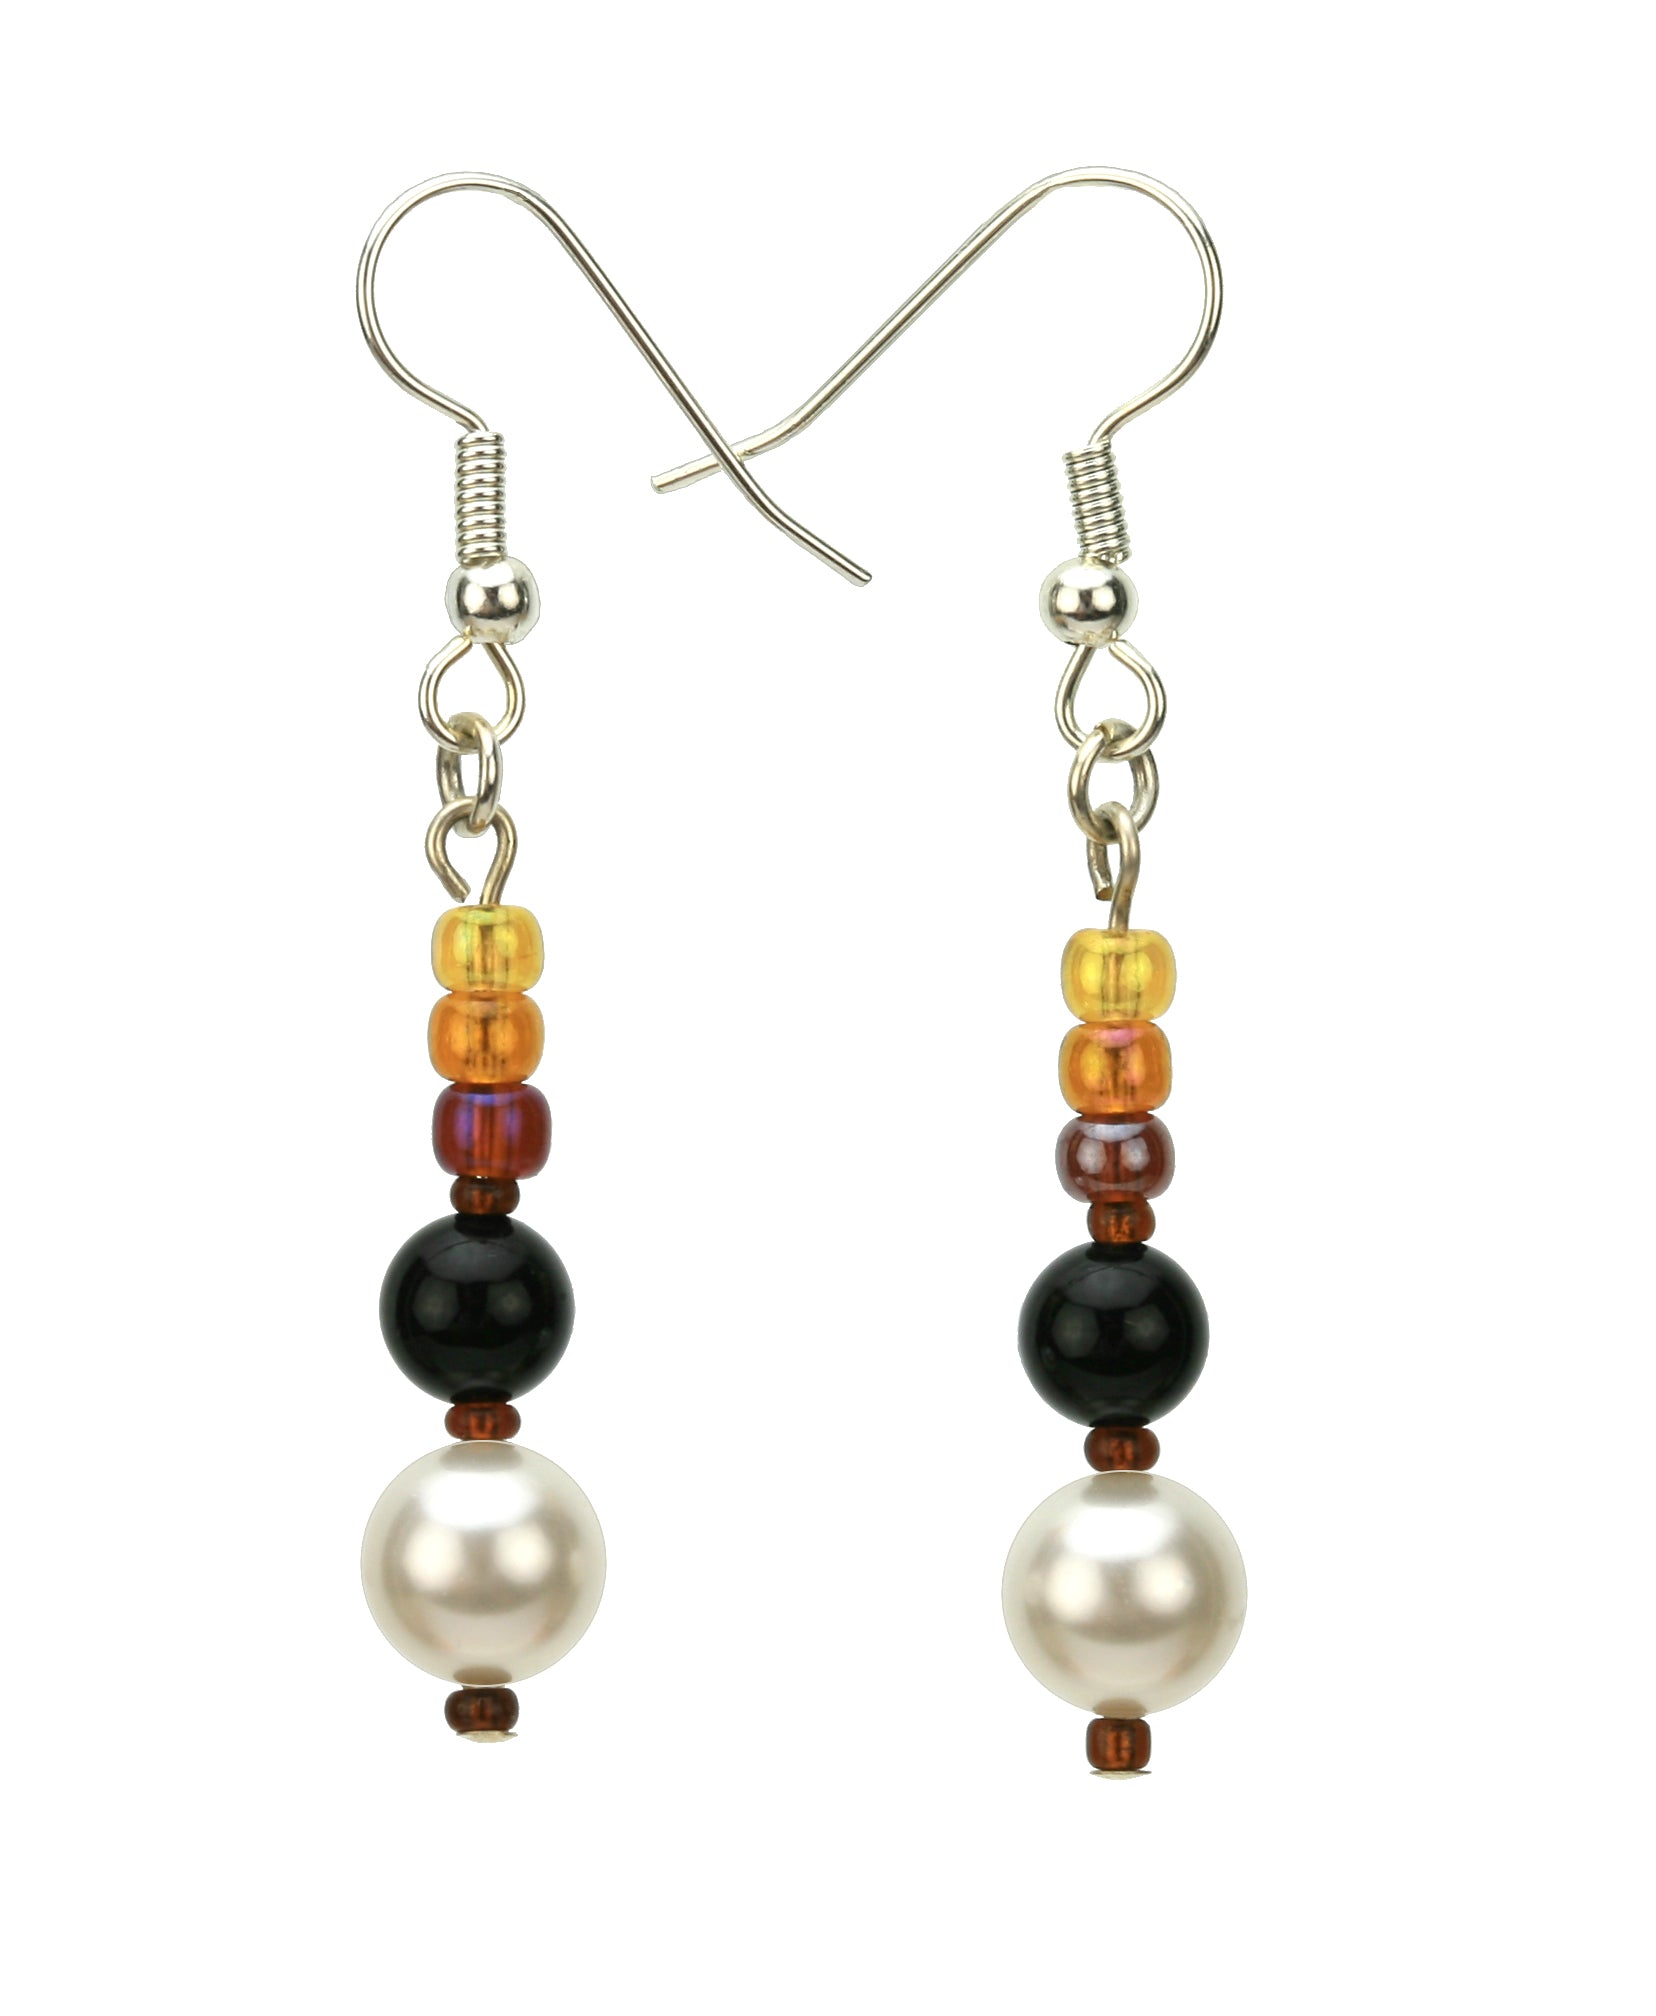 Black Onyx, White Pearls and Bronze Rocaille Silver Earrings